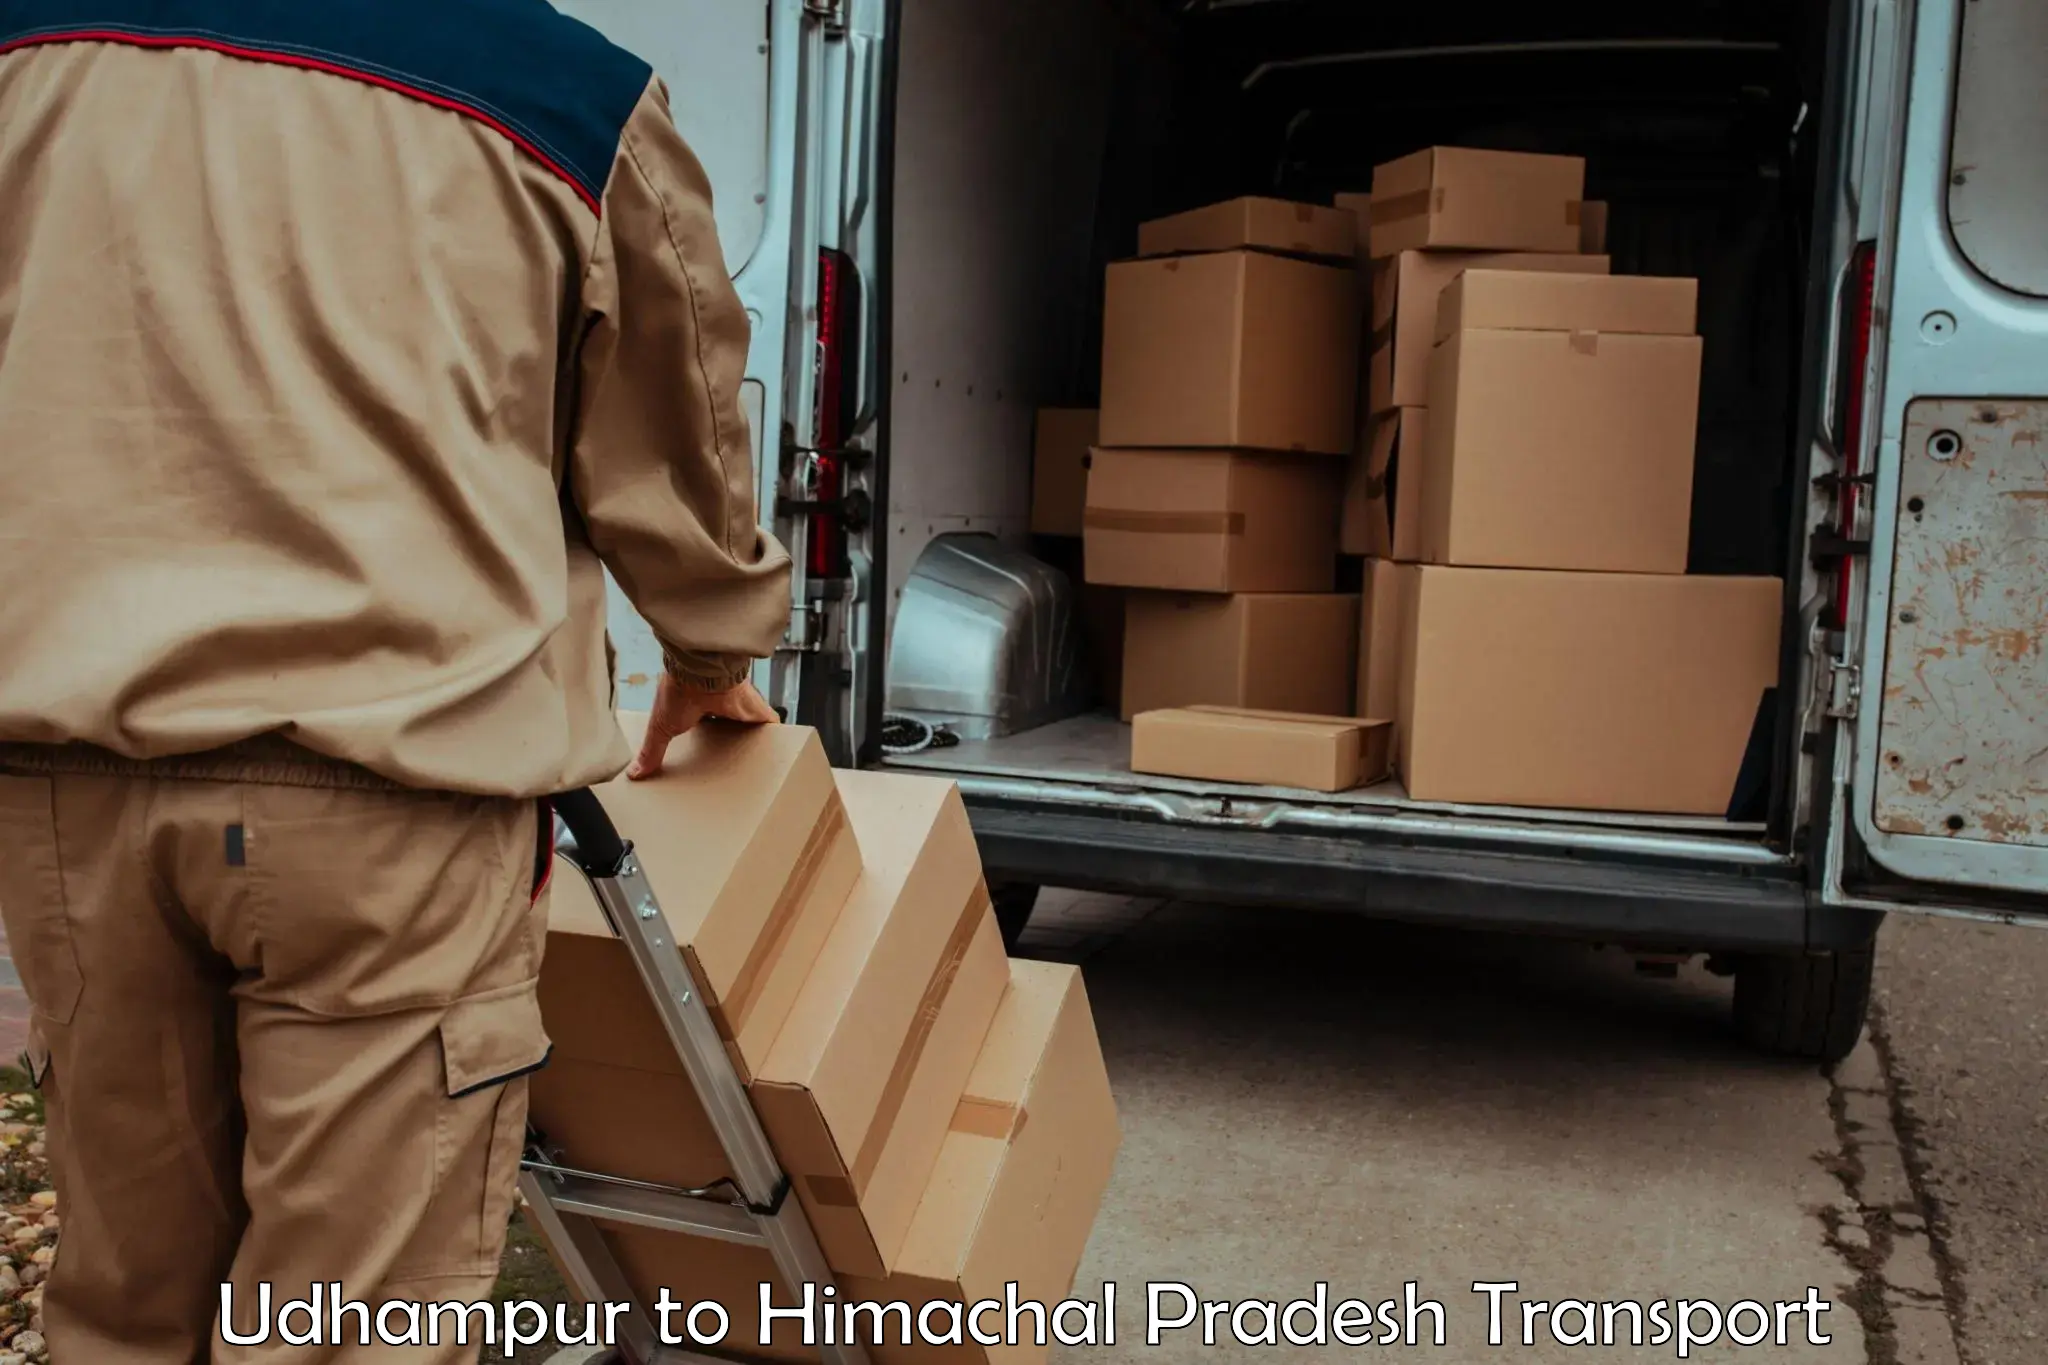 Lorry transport service in Udhampur to Rohru